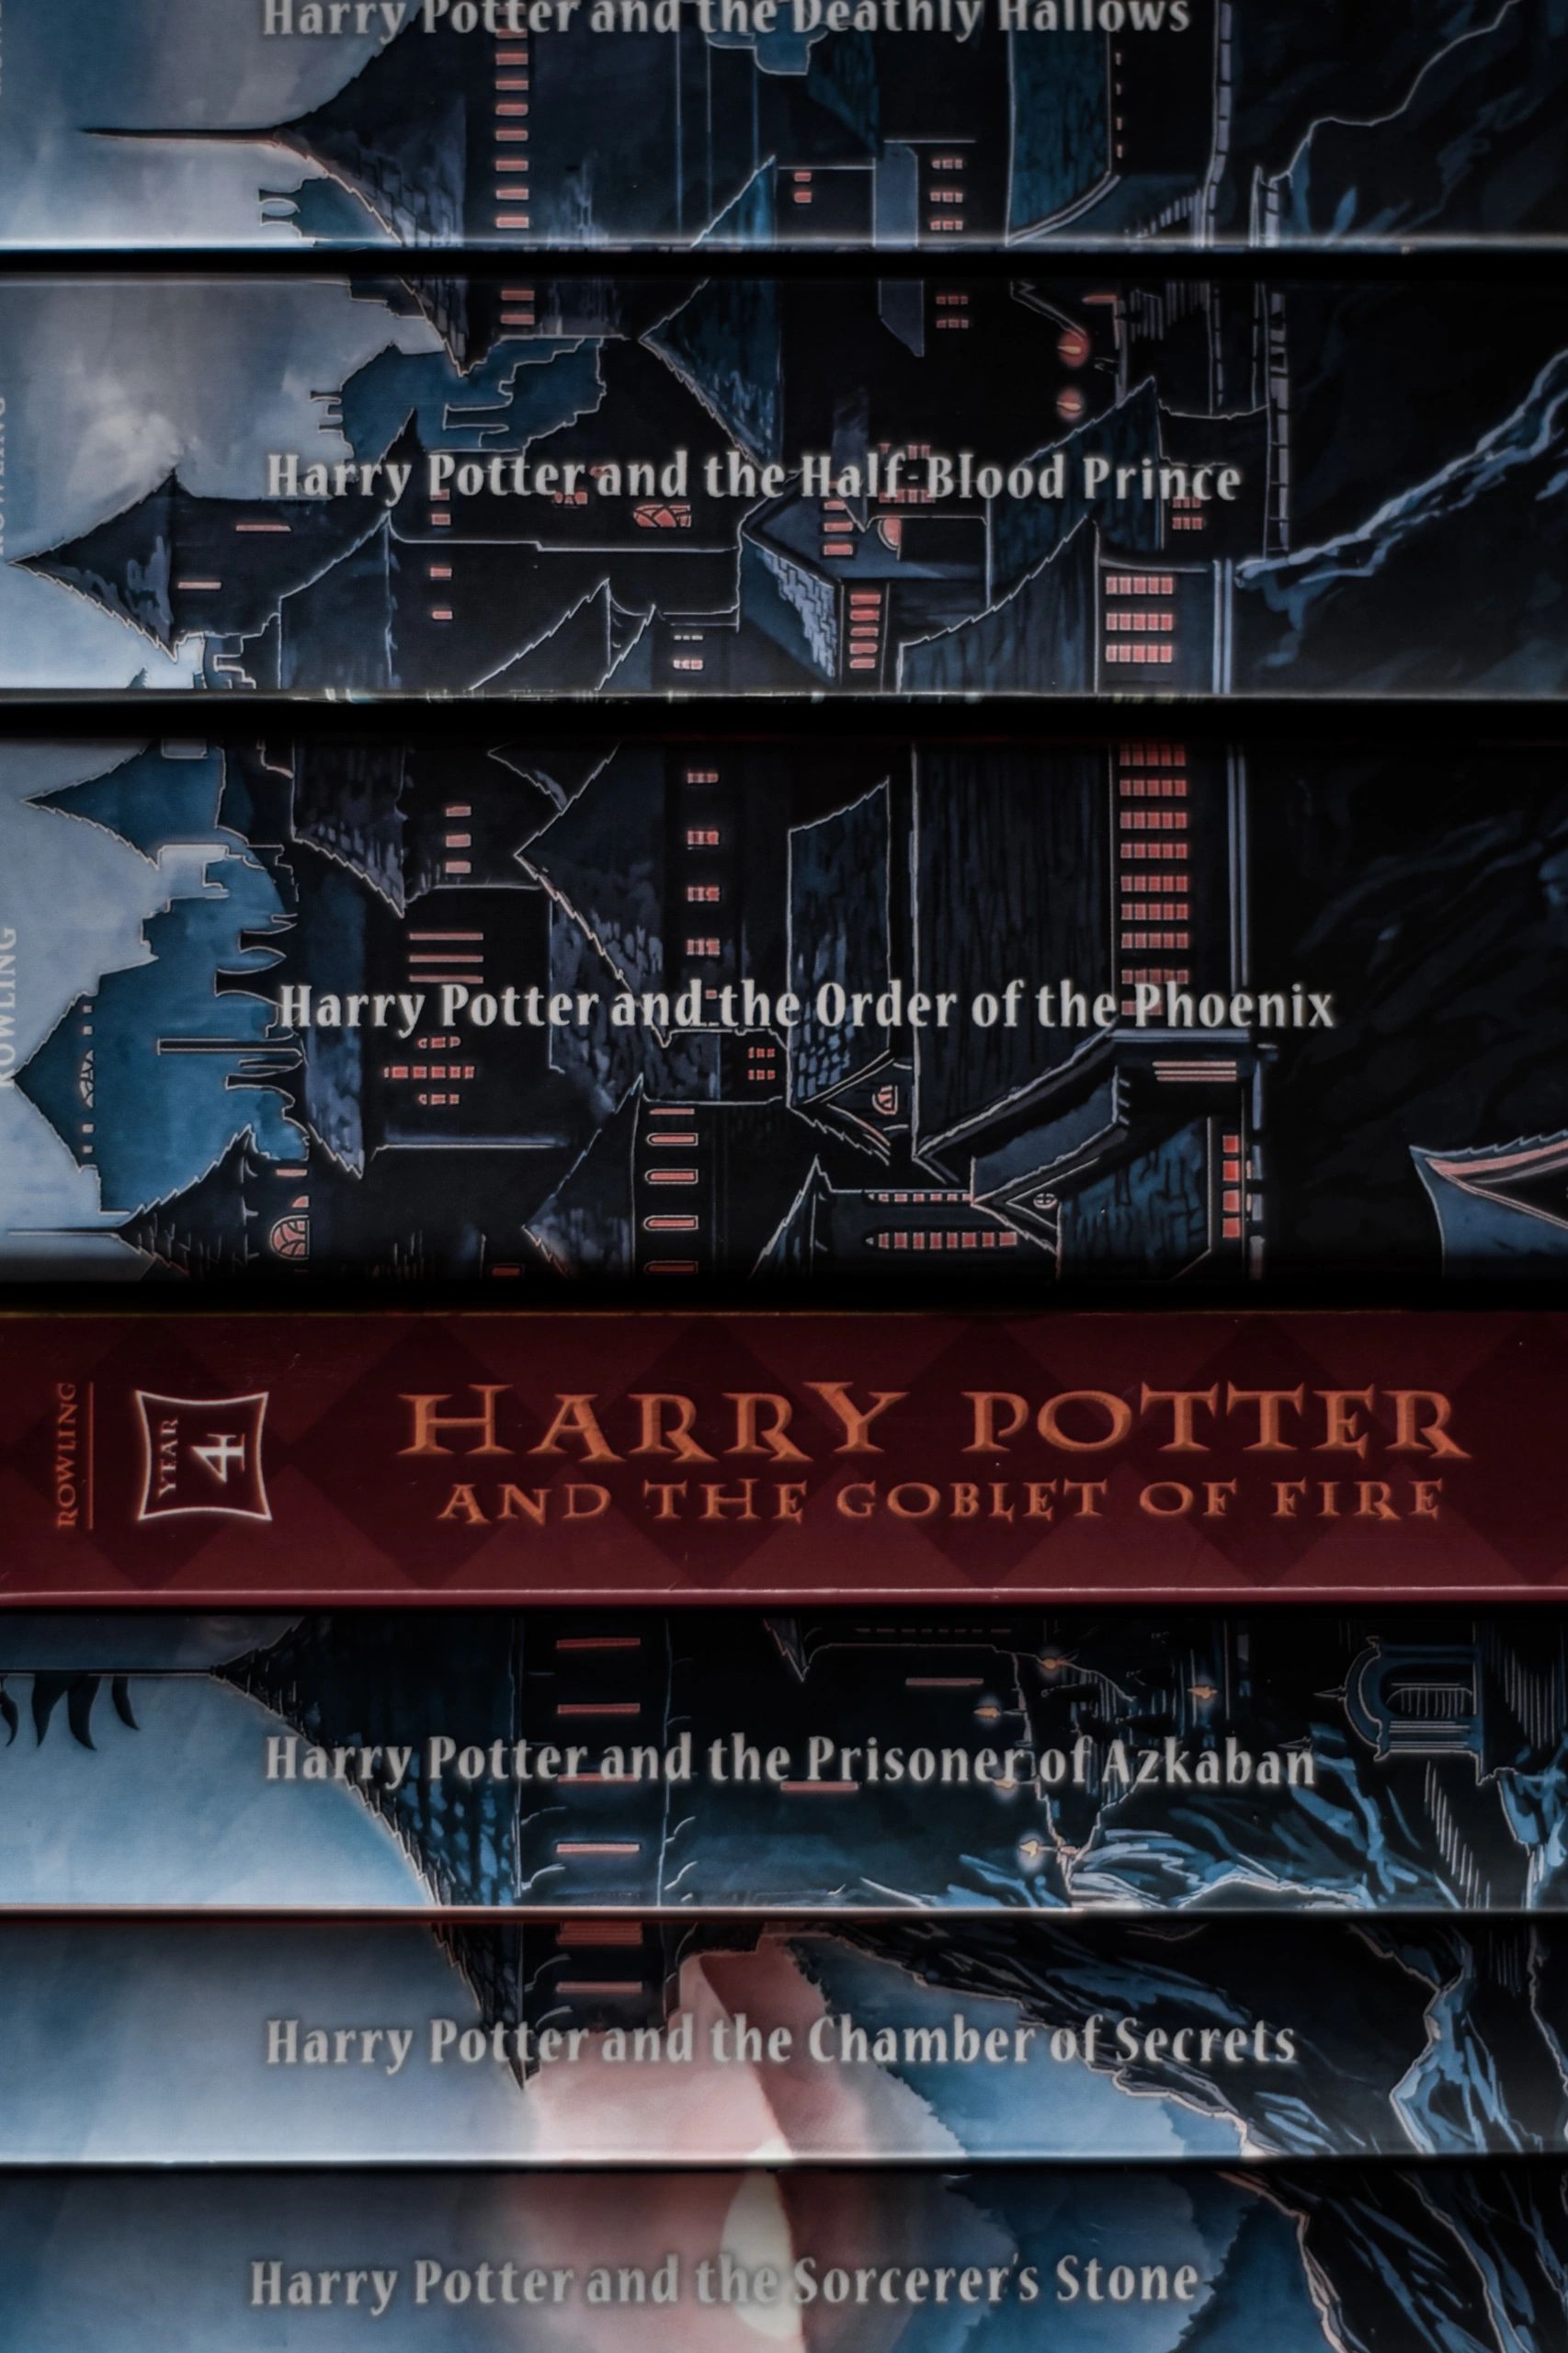 24 YEARS OF HARRY POTTER: 50 FUN FACTS / TRIVIA ABOUT THE BOOKS